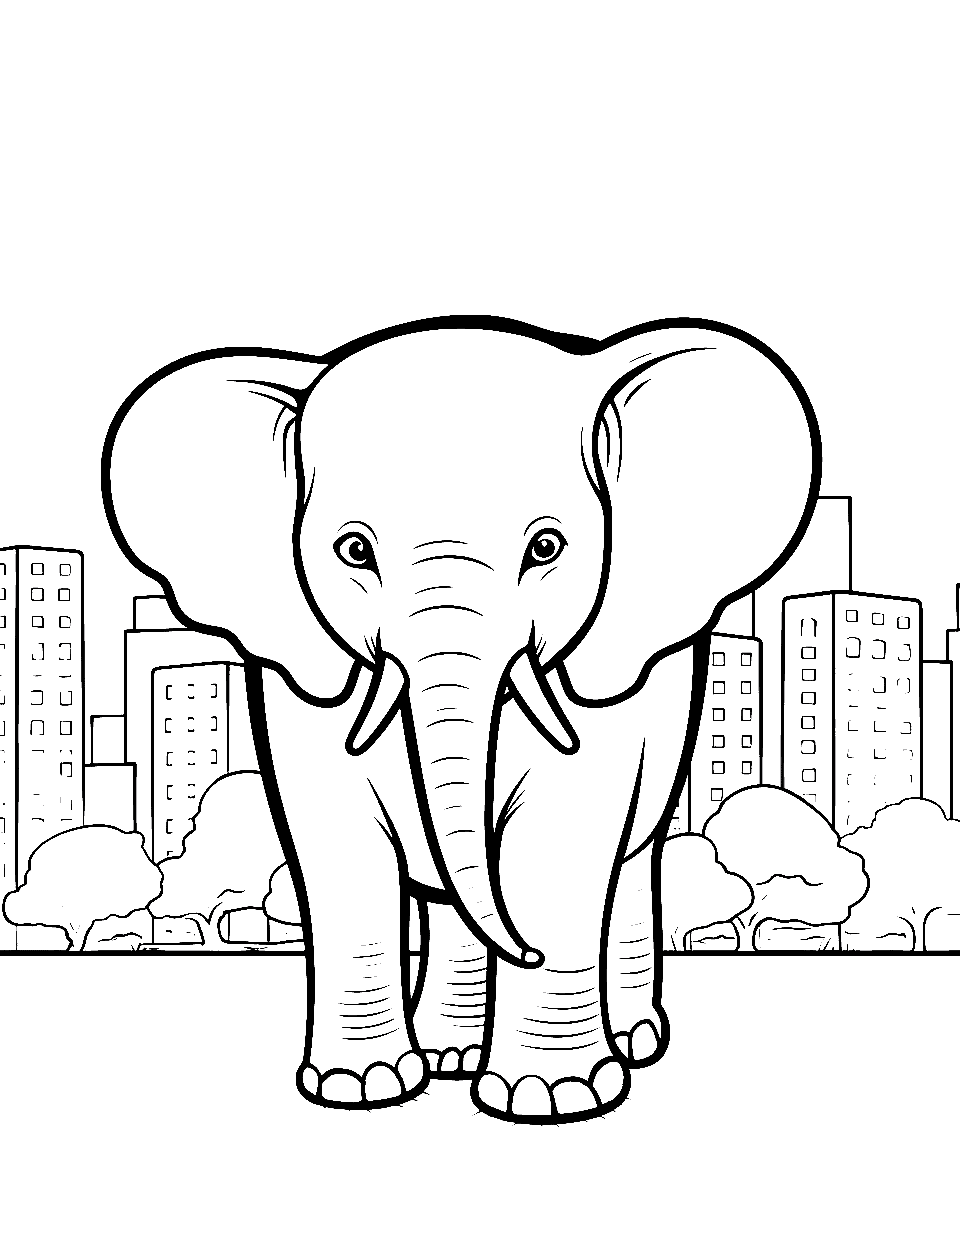 Elephant's Day Out Coloring Page - An elephant with a minimalistic cityscape in the background.